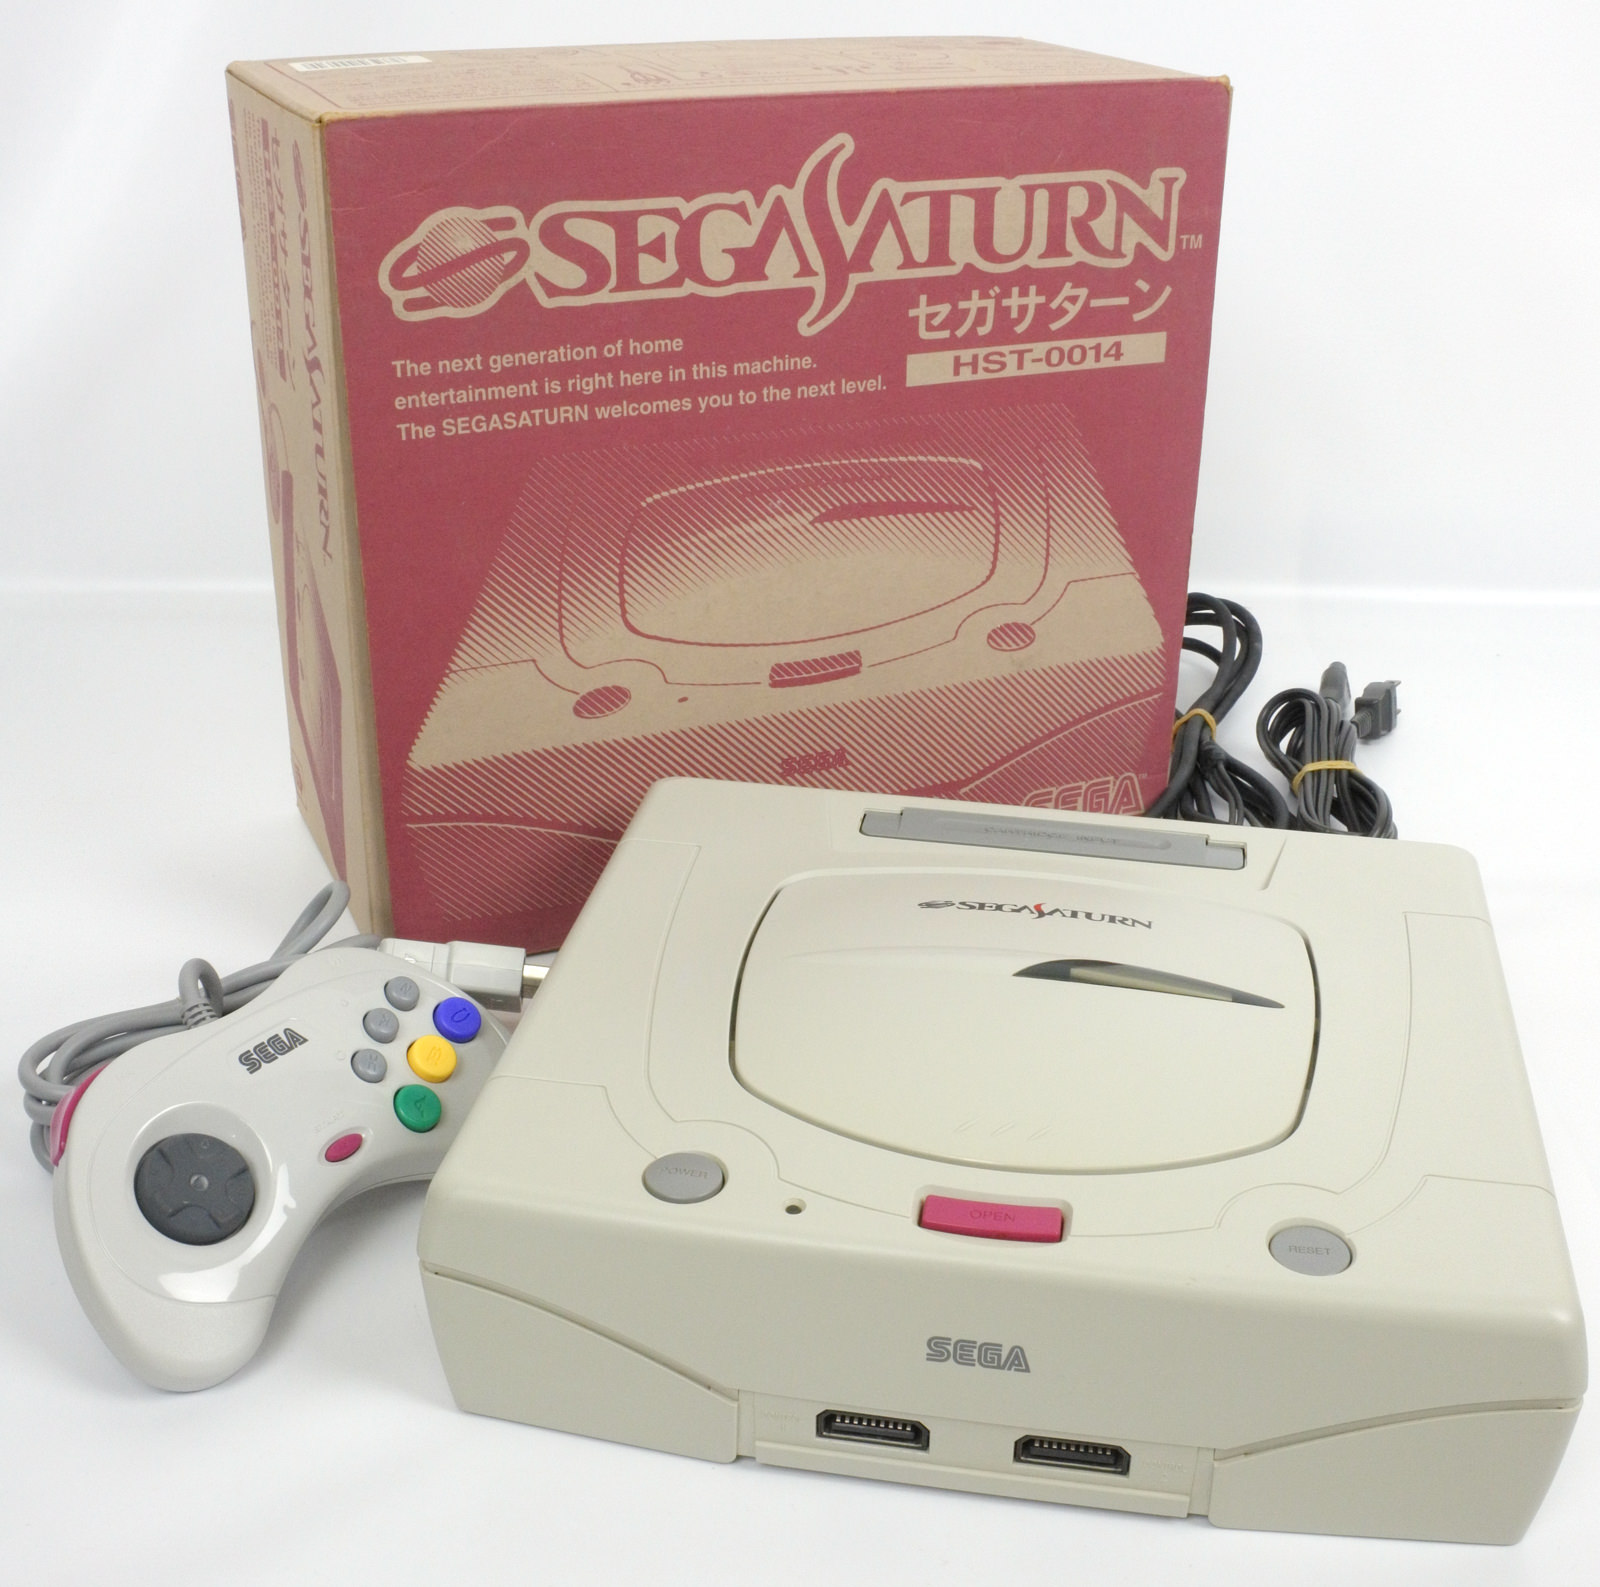 Sega Saturn White Console System Boxed Hst 3220 Tested Ref P7d005376 6321